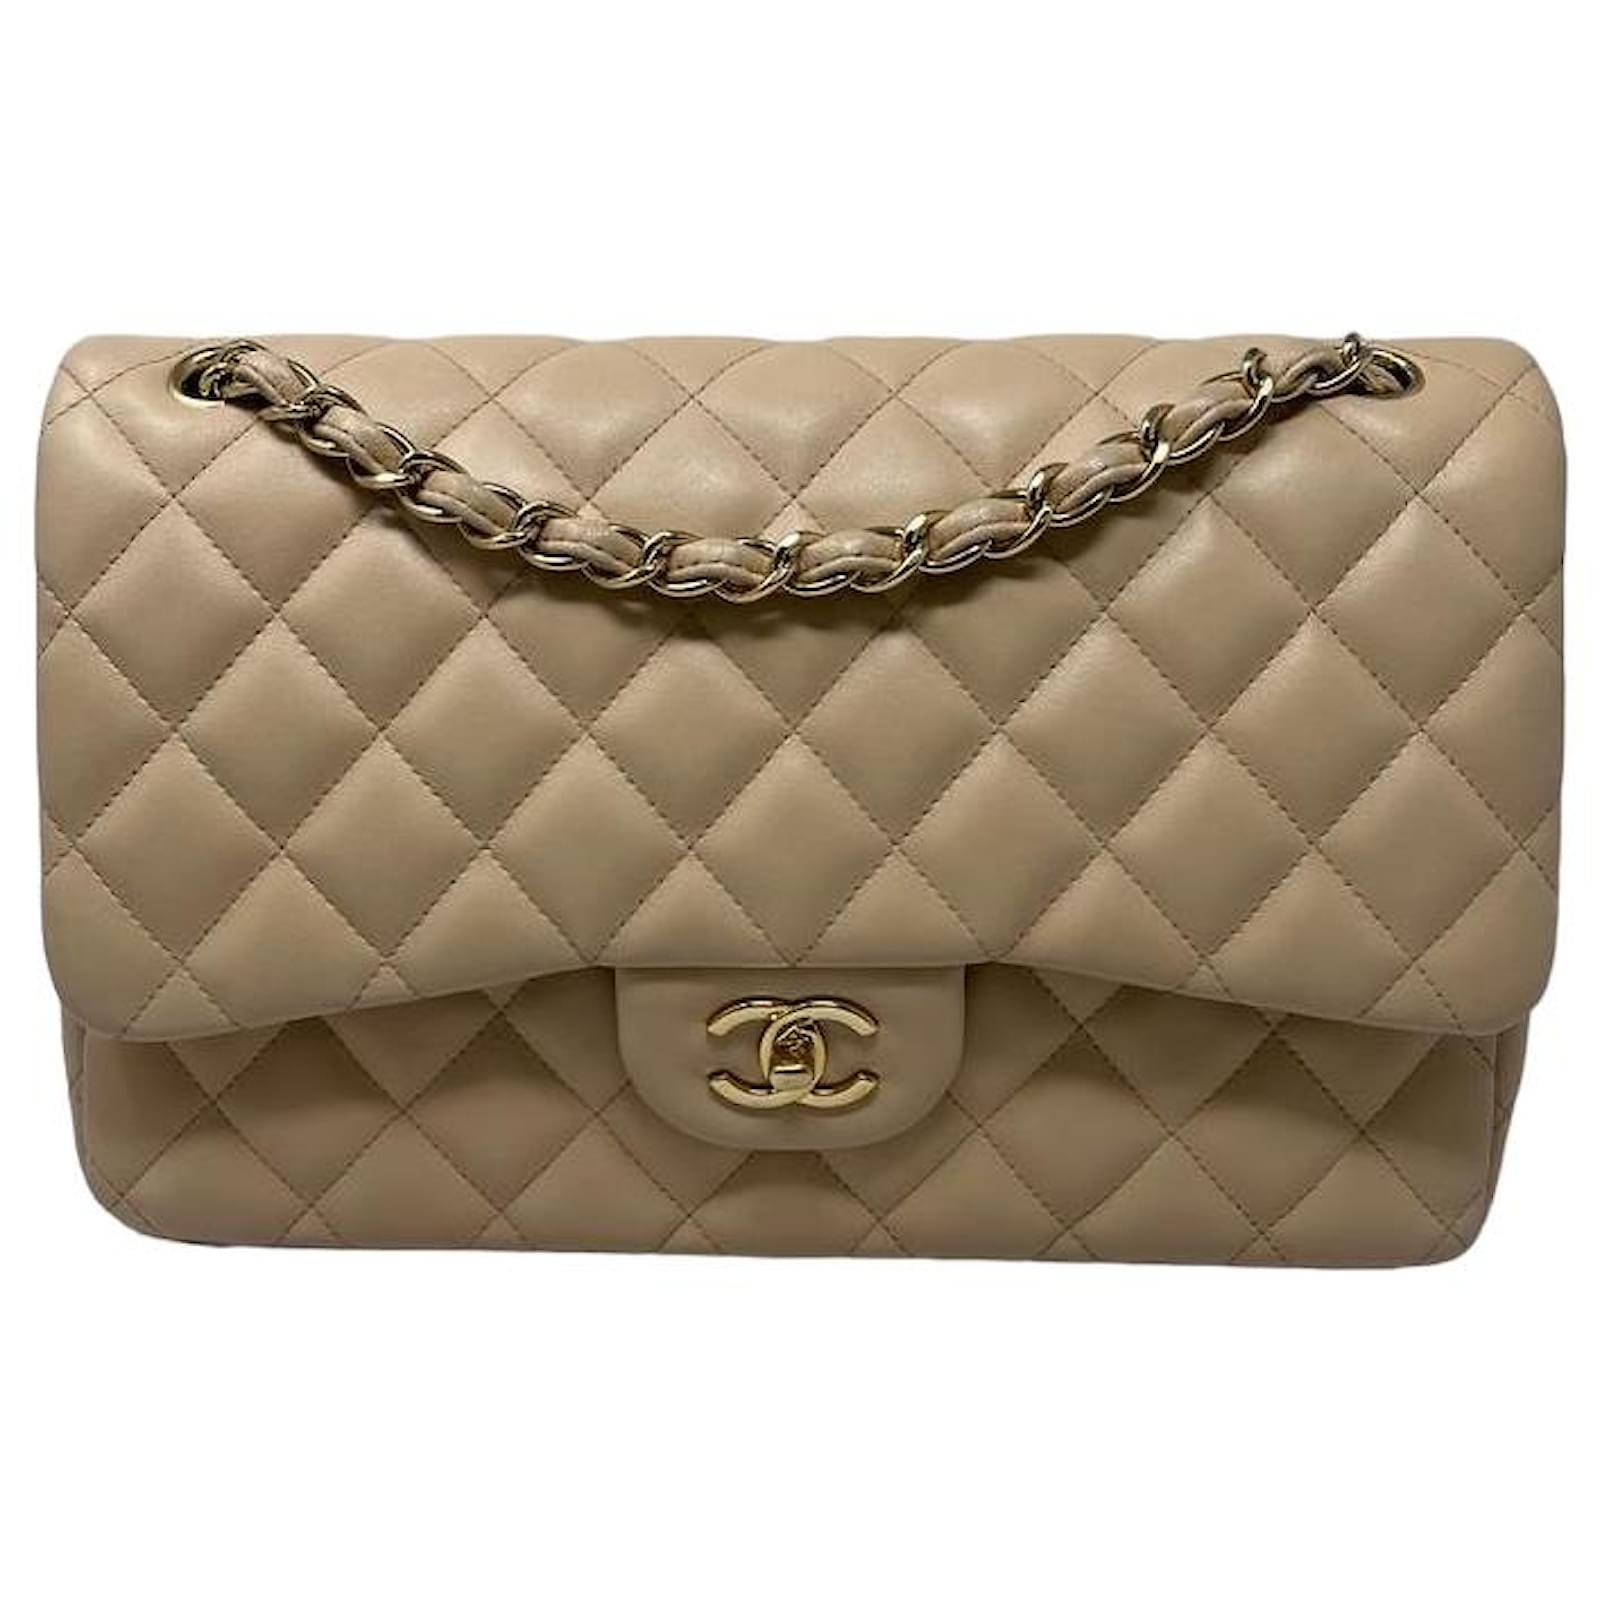 Chanel 2012 Quilted Caviar Classic Double Flap Bag in Beige